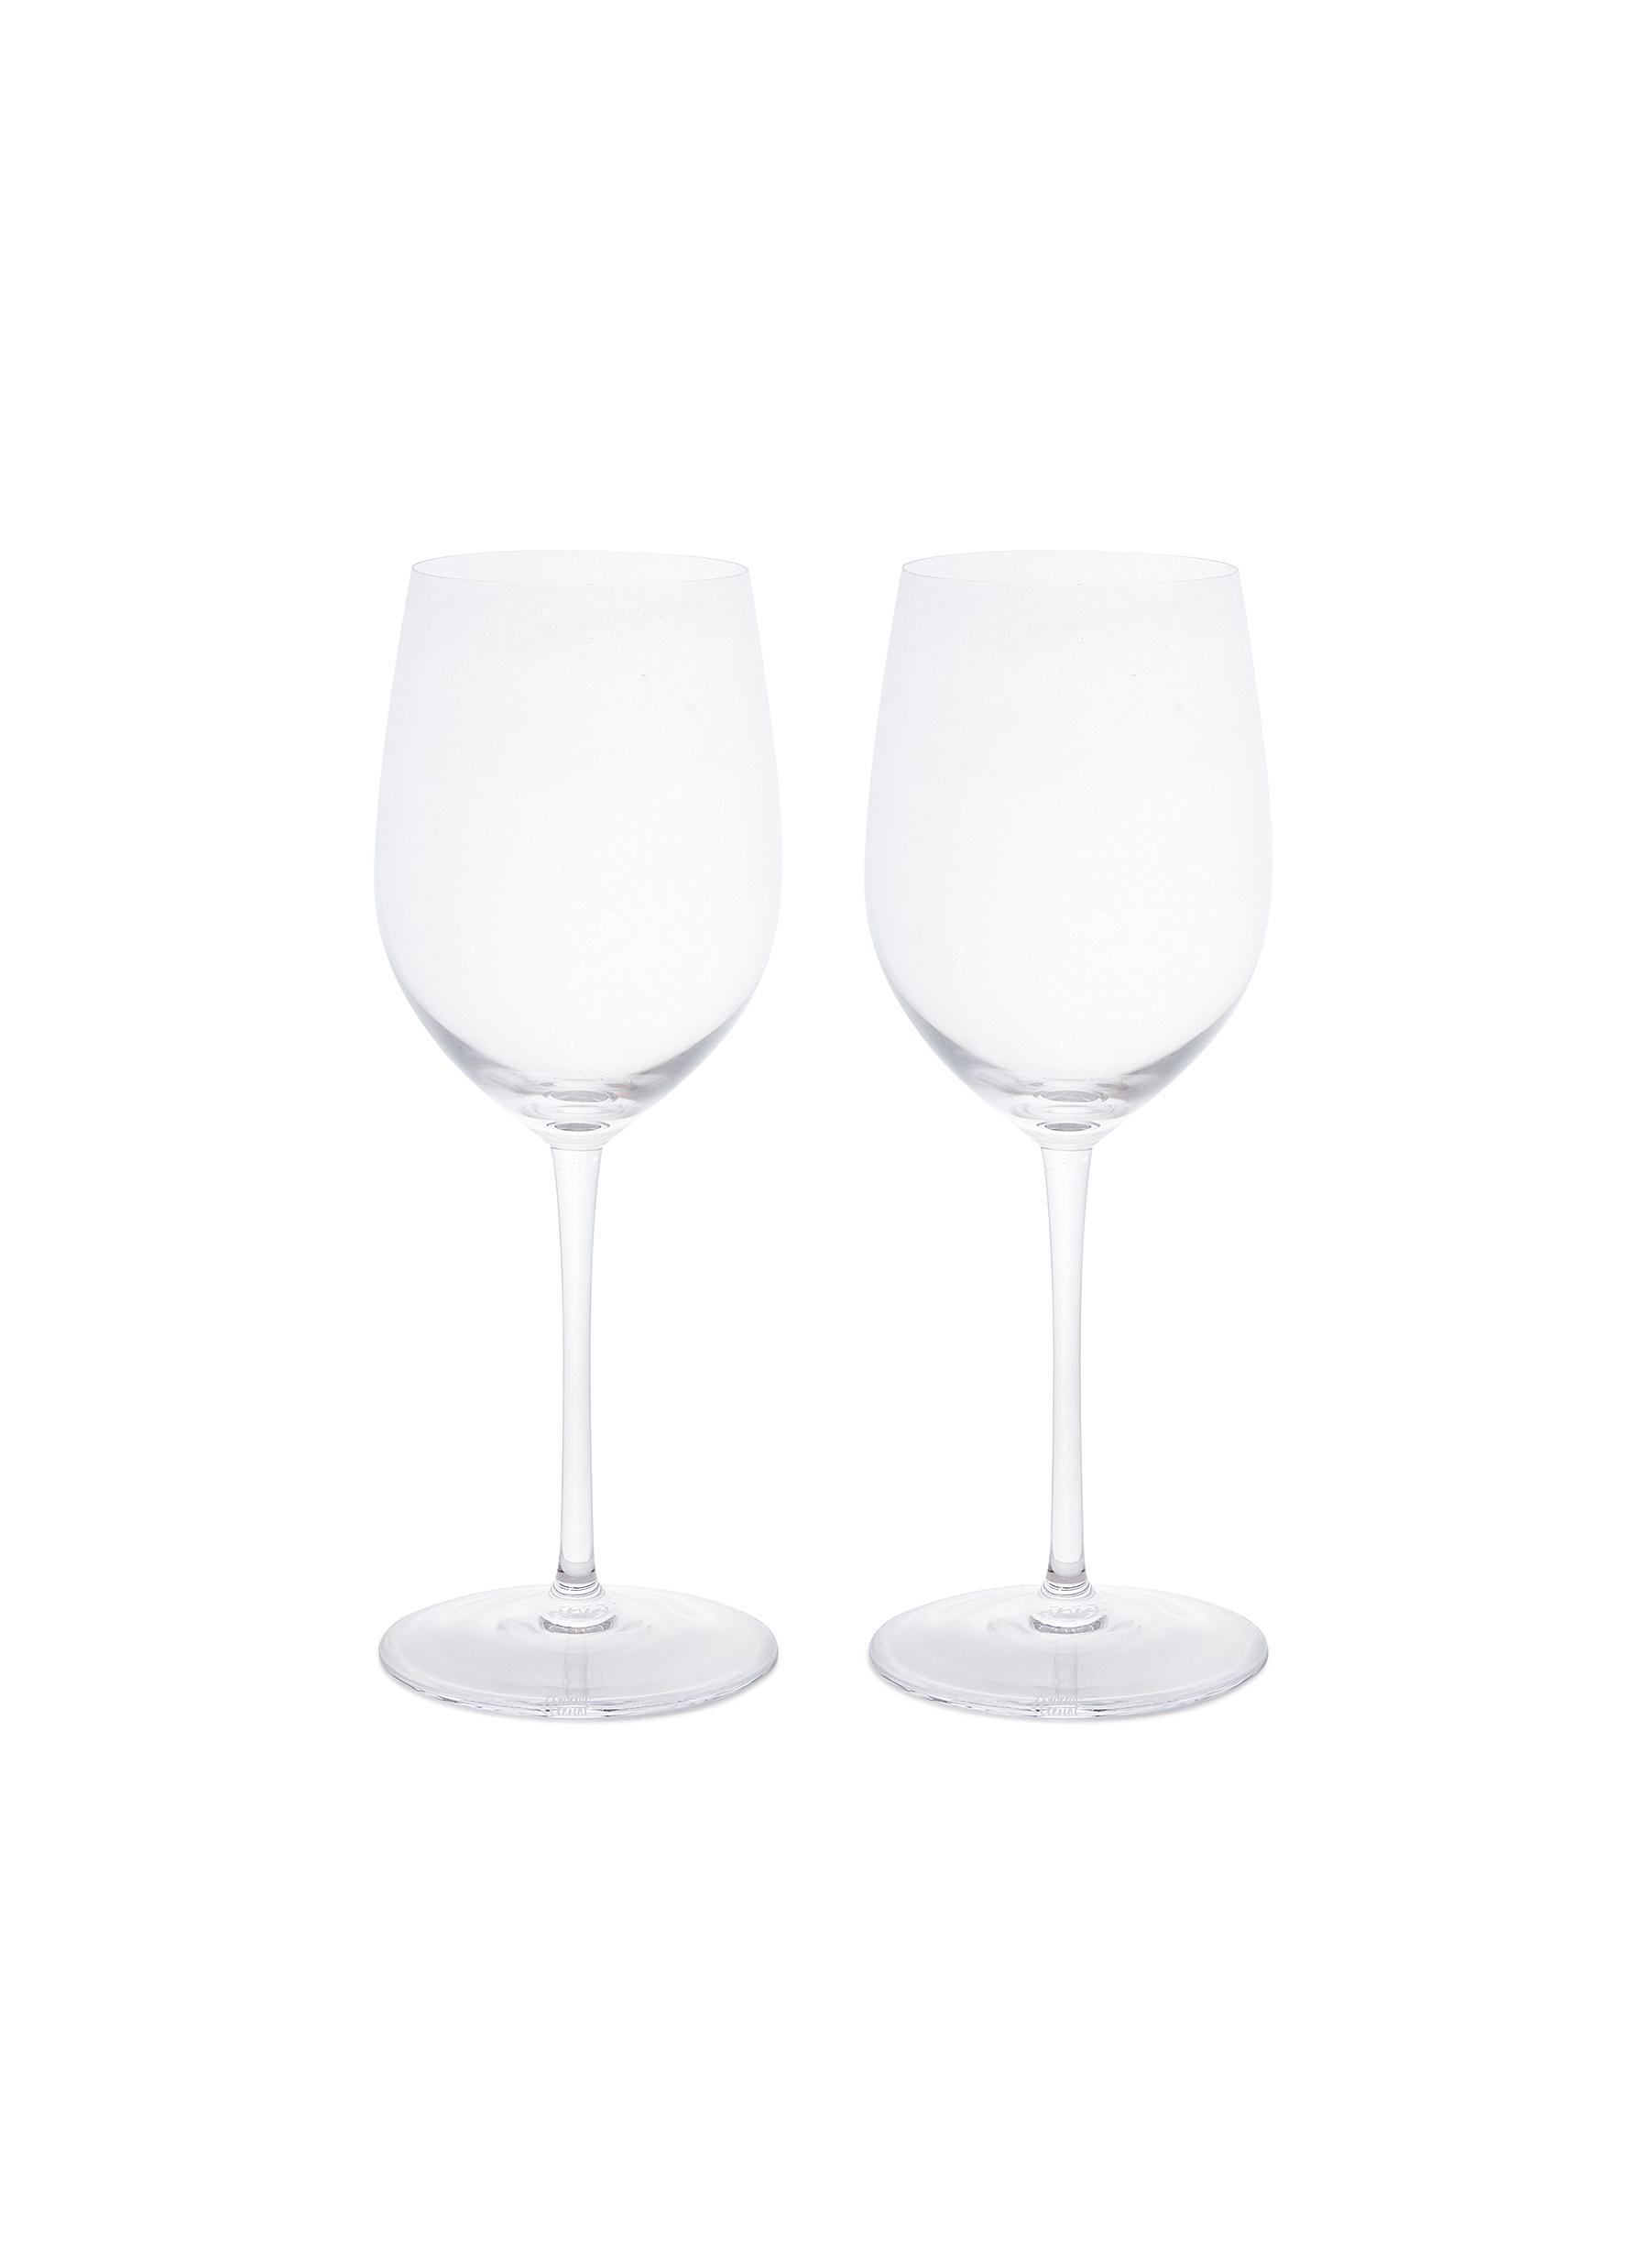 Riedel 265 Years Anniversary Sommeliers Mature Bordeaux/Chablis/Chordonnay Glass - Set of 2